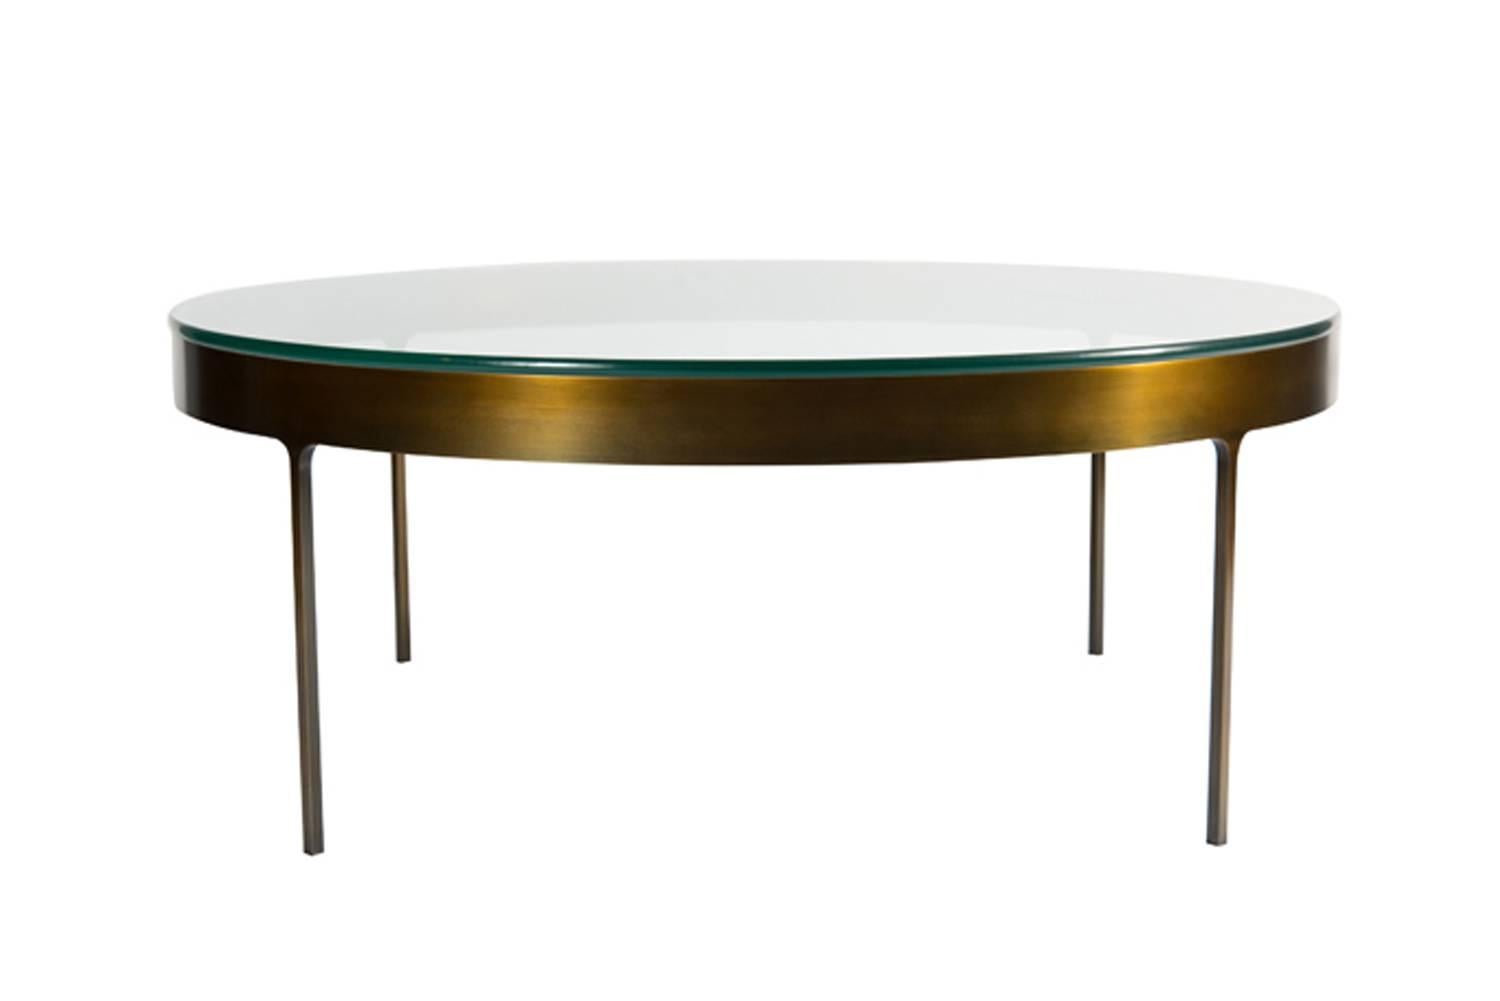 Bronze ring cocktail table with fitted clear glass top. Solid flat bar metal frame with on thin profile legs with interior radius joint detail.

Custom orders have a lead time of 10-12 weeks FOB NYC. Lead time contingent upon selection of